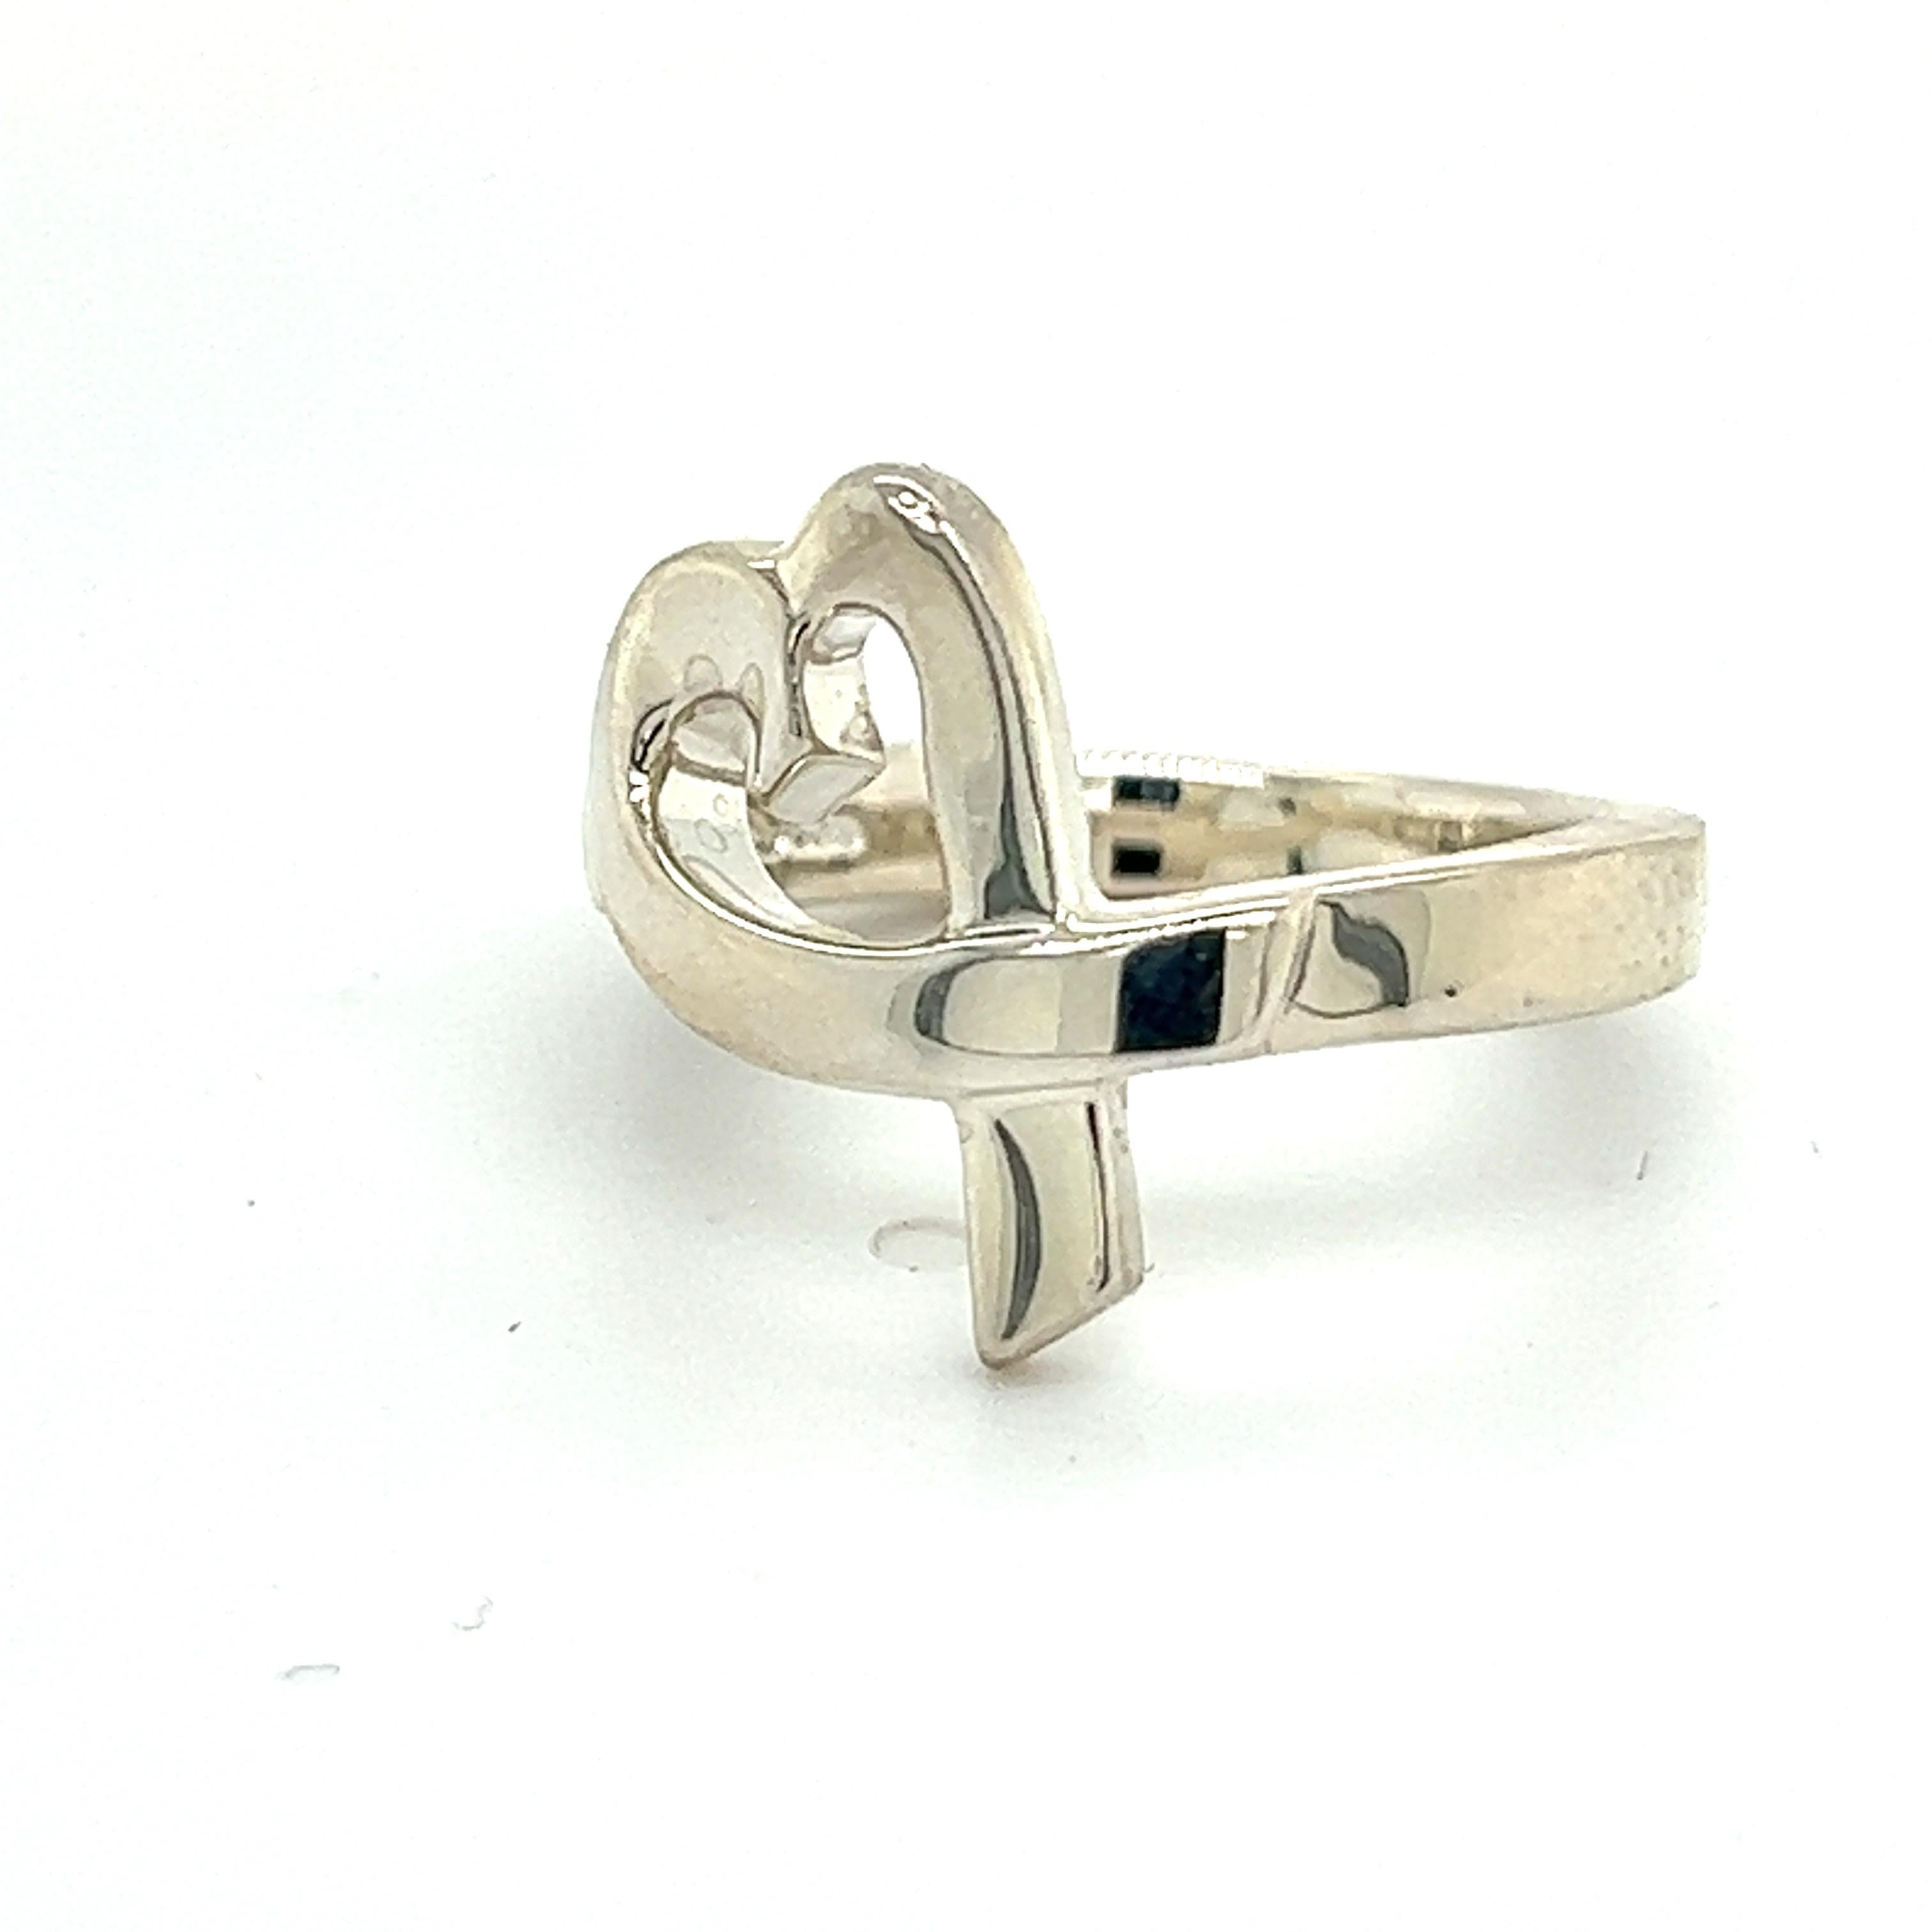 Tiffany & Co Estate Heart Ring Size 6 Sterling Silver TIF498

TRUSTED SELLER SINCE 2002

PLEASE SEE OUR HUNDREDS OF POSITIVE FEEDBACKS FROM OUR CLIENTS!!

FREE SHIPPING

DETAILS
Style: Heart
Size: 6
Metal: Sterling Silver
Weight: 4.35 Grams

This